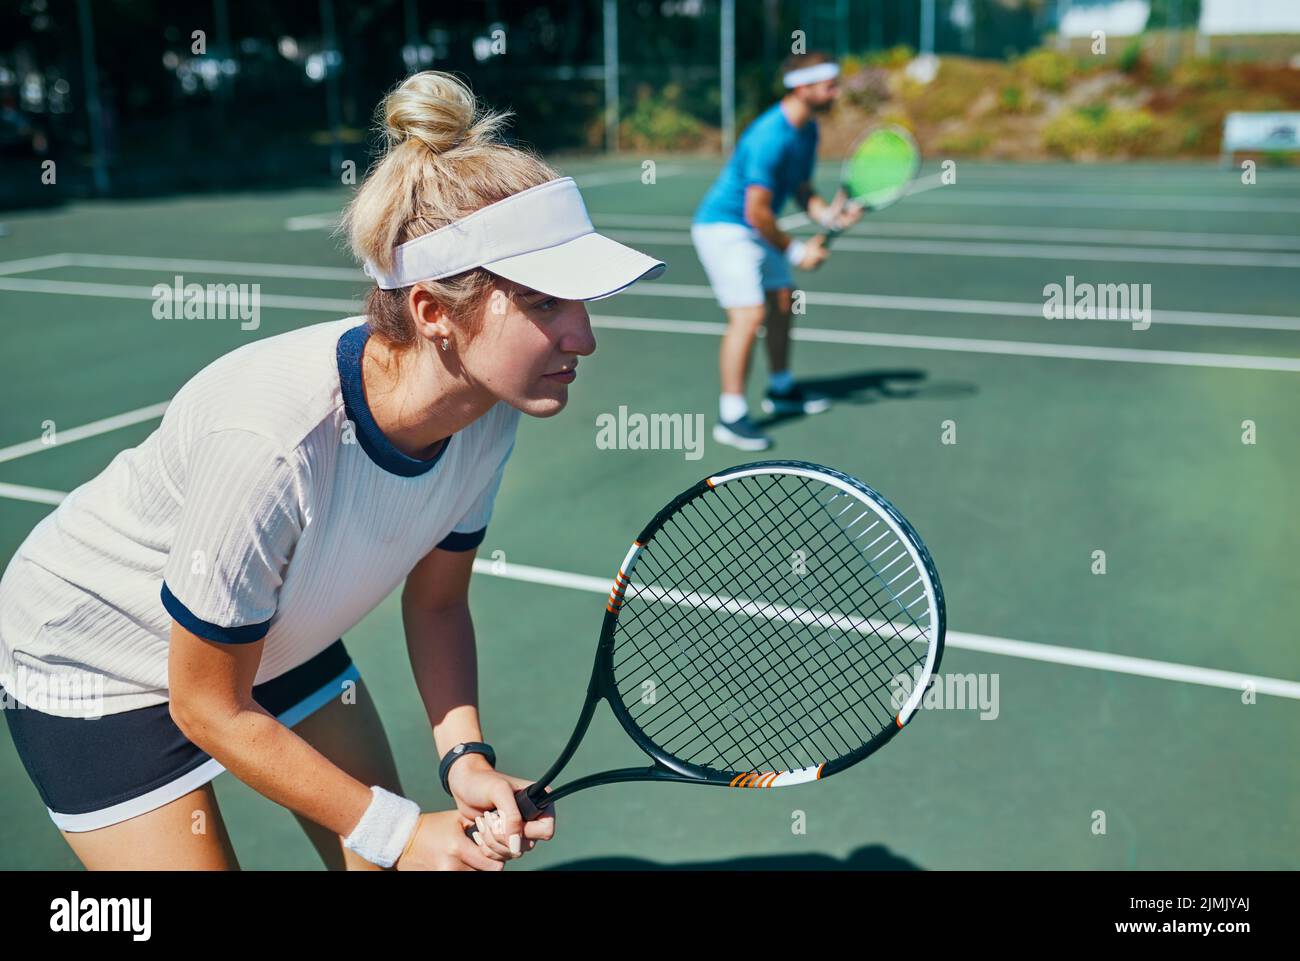 Winners never lose their focus. an attractive young female tennis player playing together with a male teammate outdoors on a court. Stock Photo